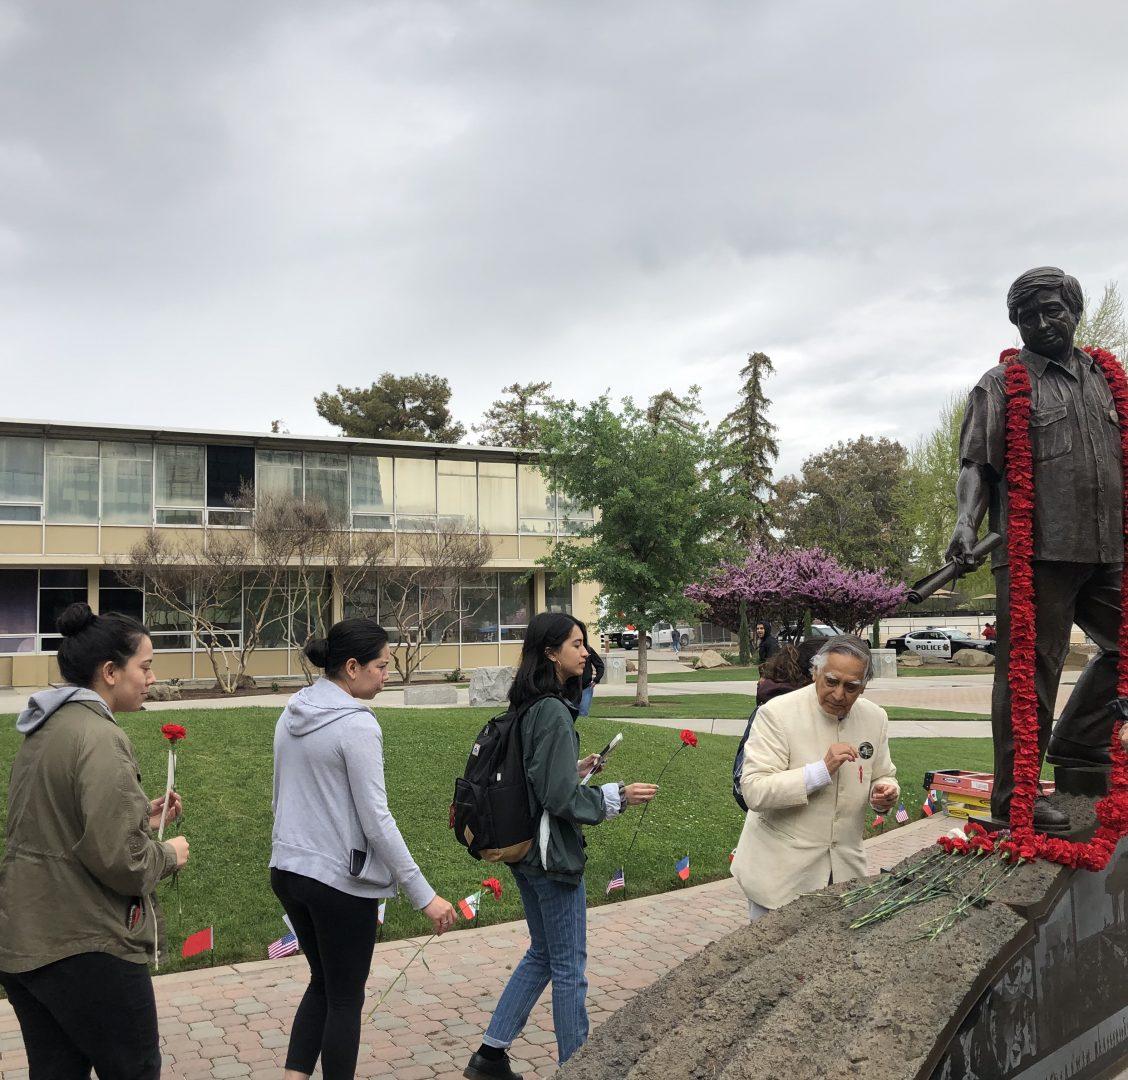 Dr. Sudarshan Kapoor (right) helps Fresno State students arrange red carnations on the Cesar Chavez statue in the Peace Garden after the celebration on March 27. (Andrea Marin Contreras/The Collegian)